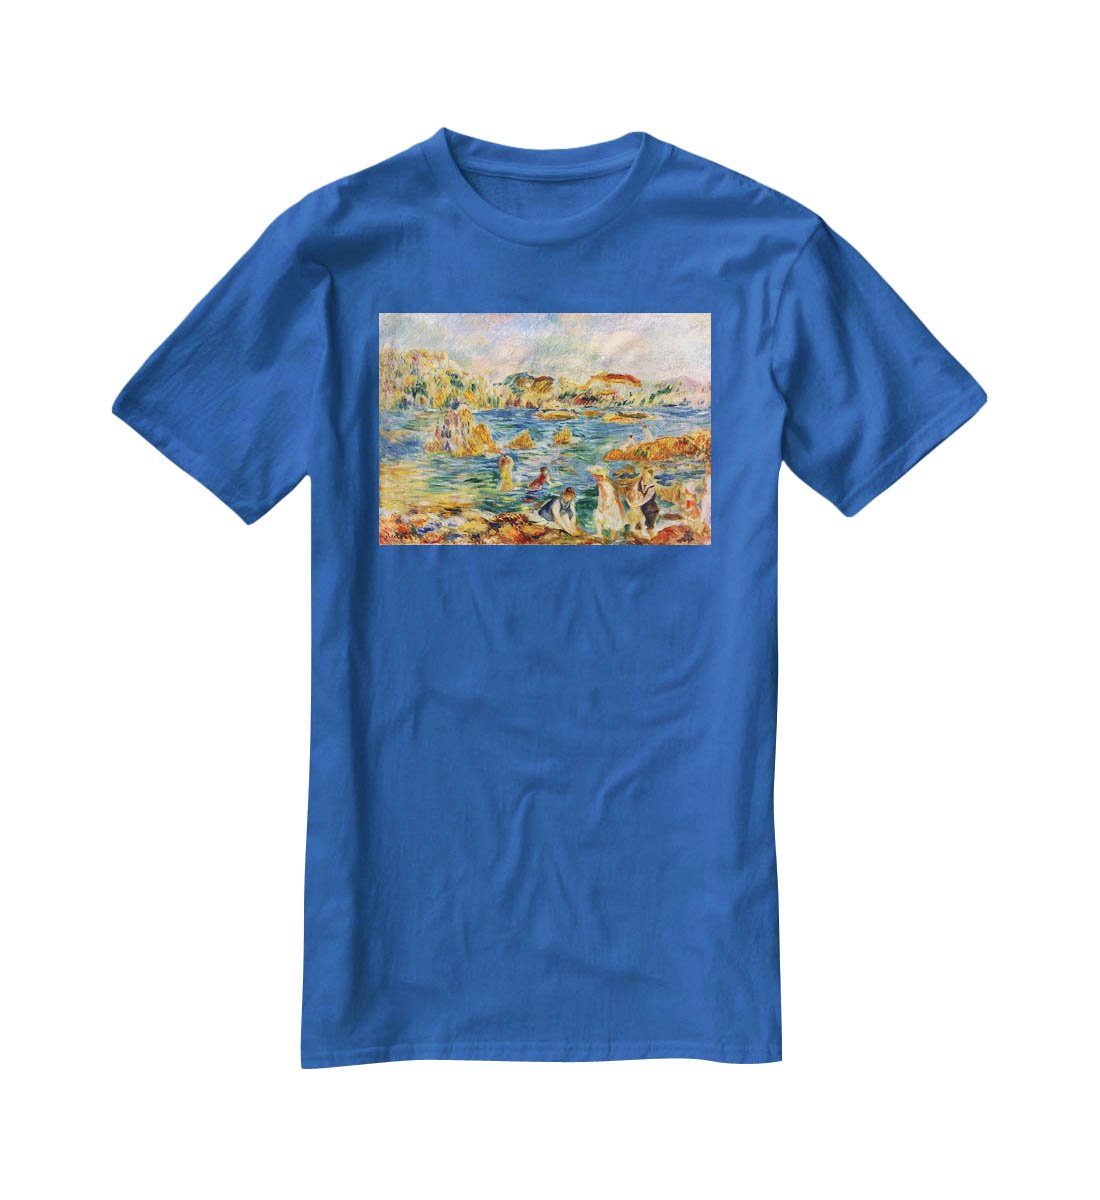 At the beach of Guernesey by Renoir T-Shirt - Canvas Art Rocks - 2